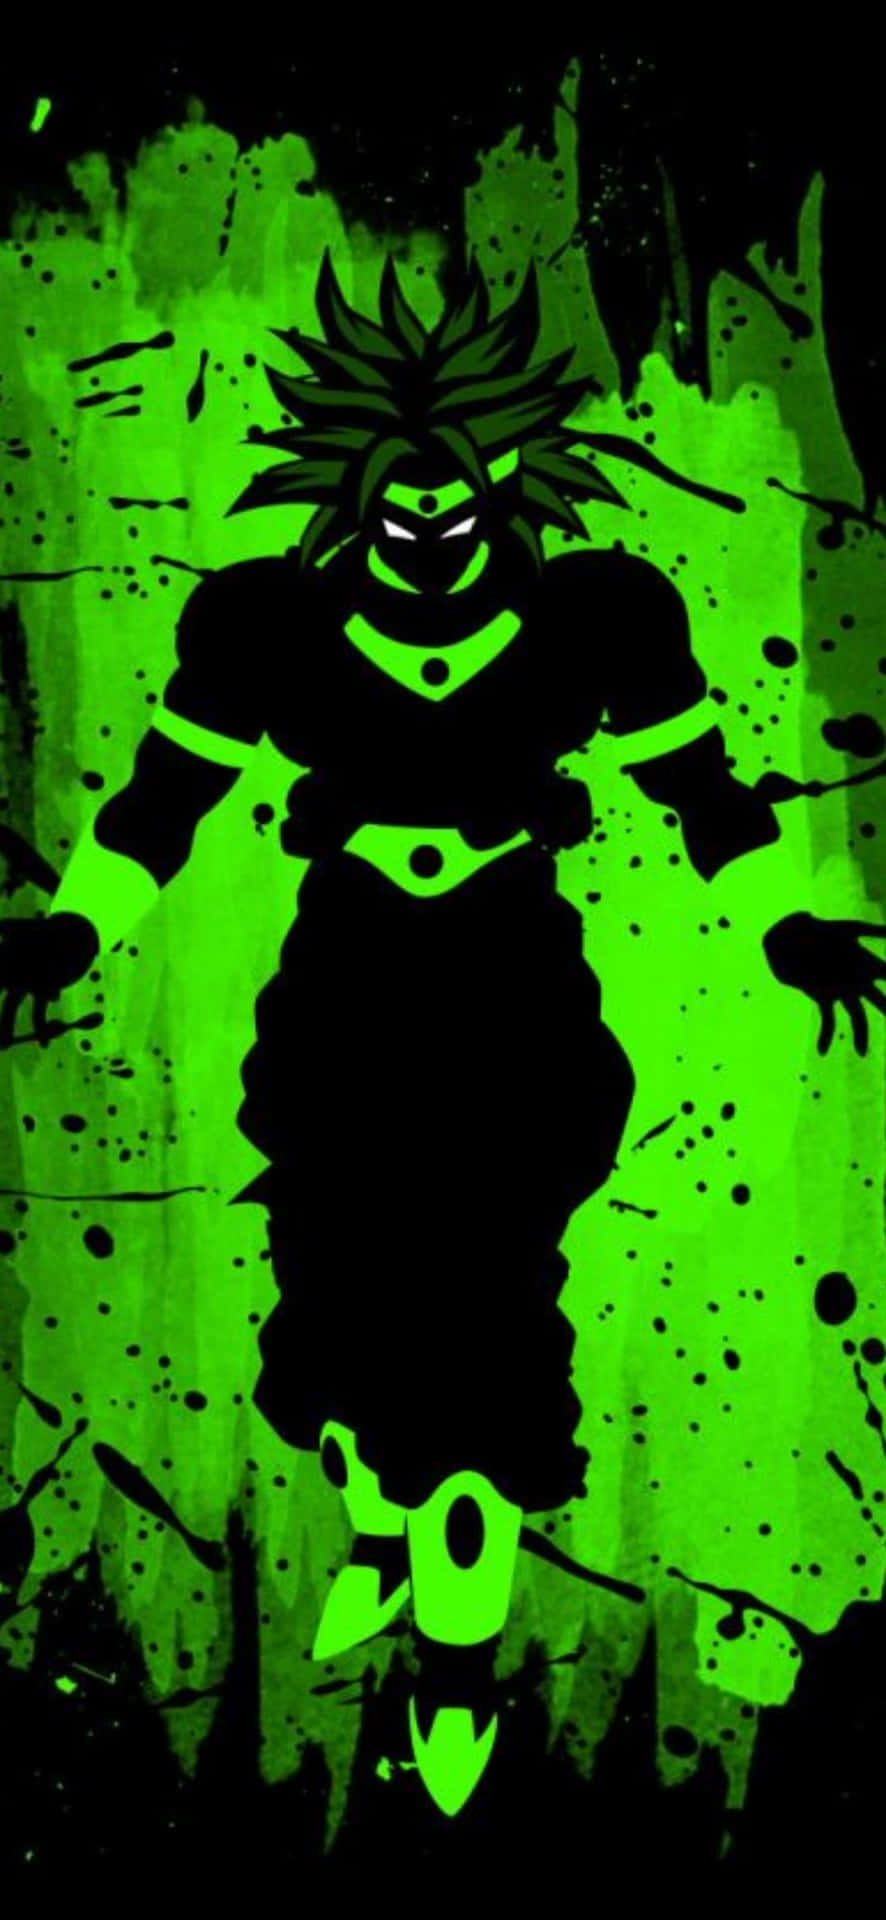 Scroll with Ease on the Smooth Broly Iphone Display Wallpaper